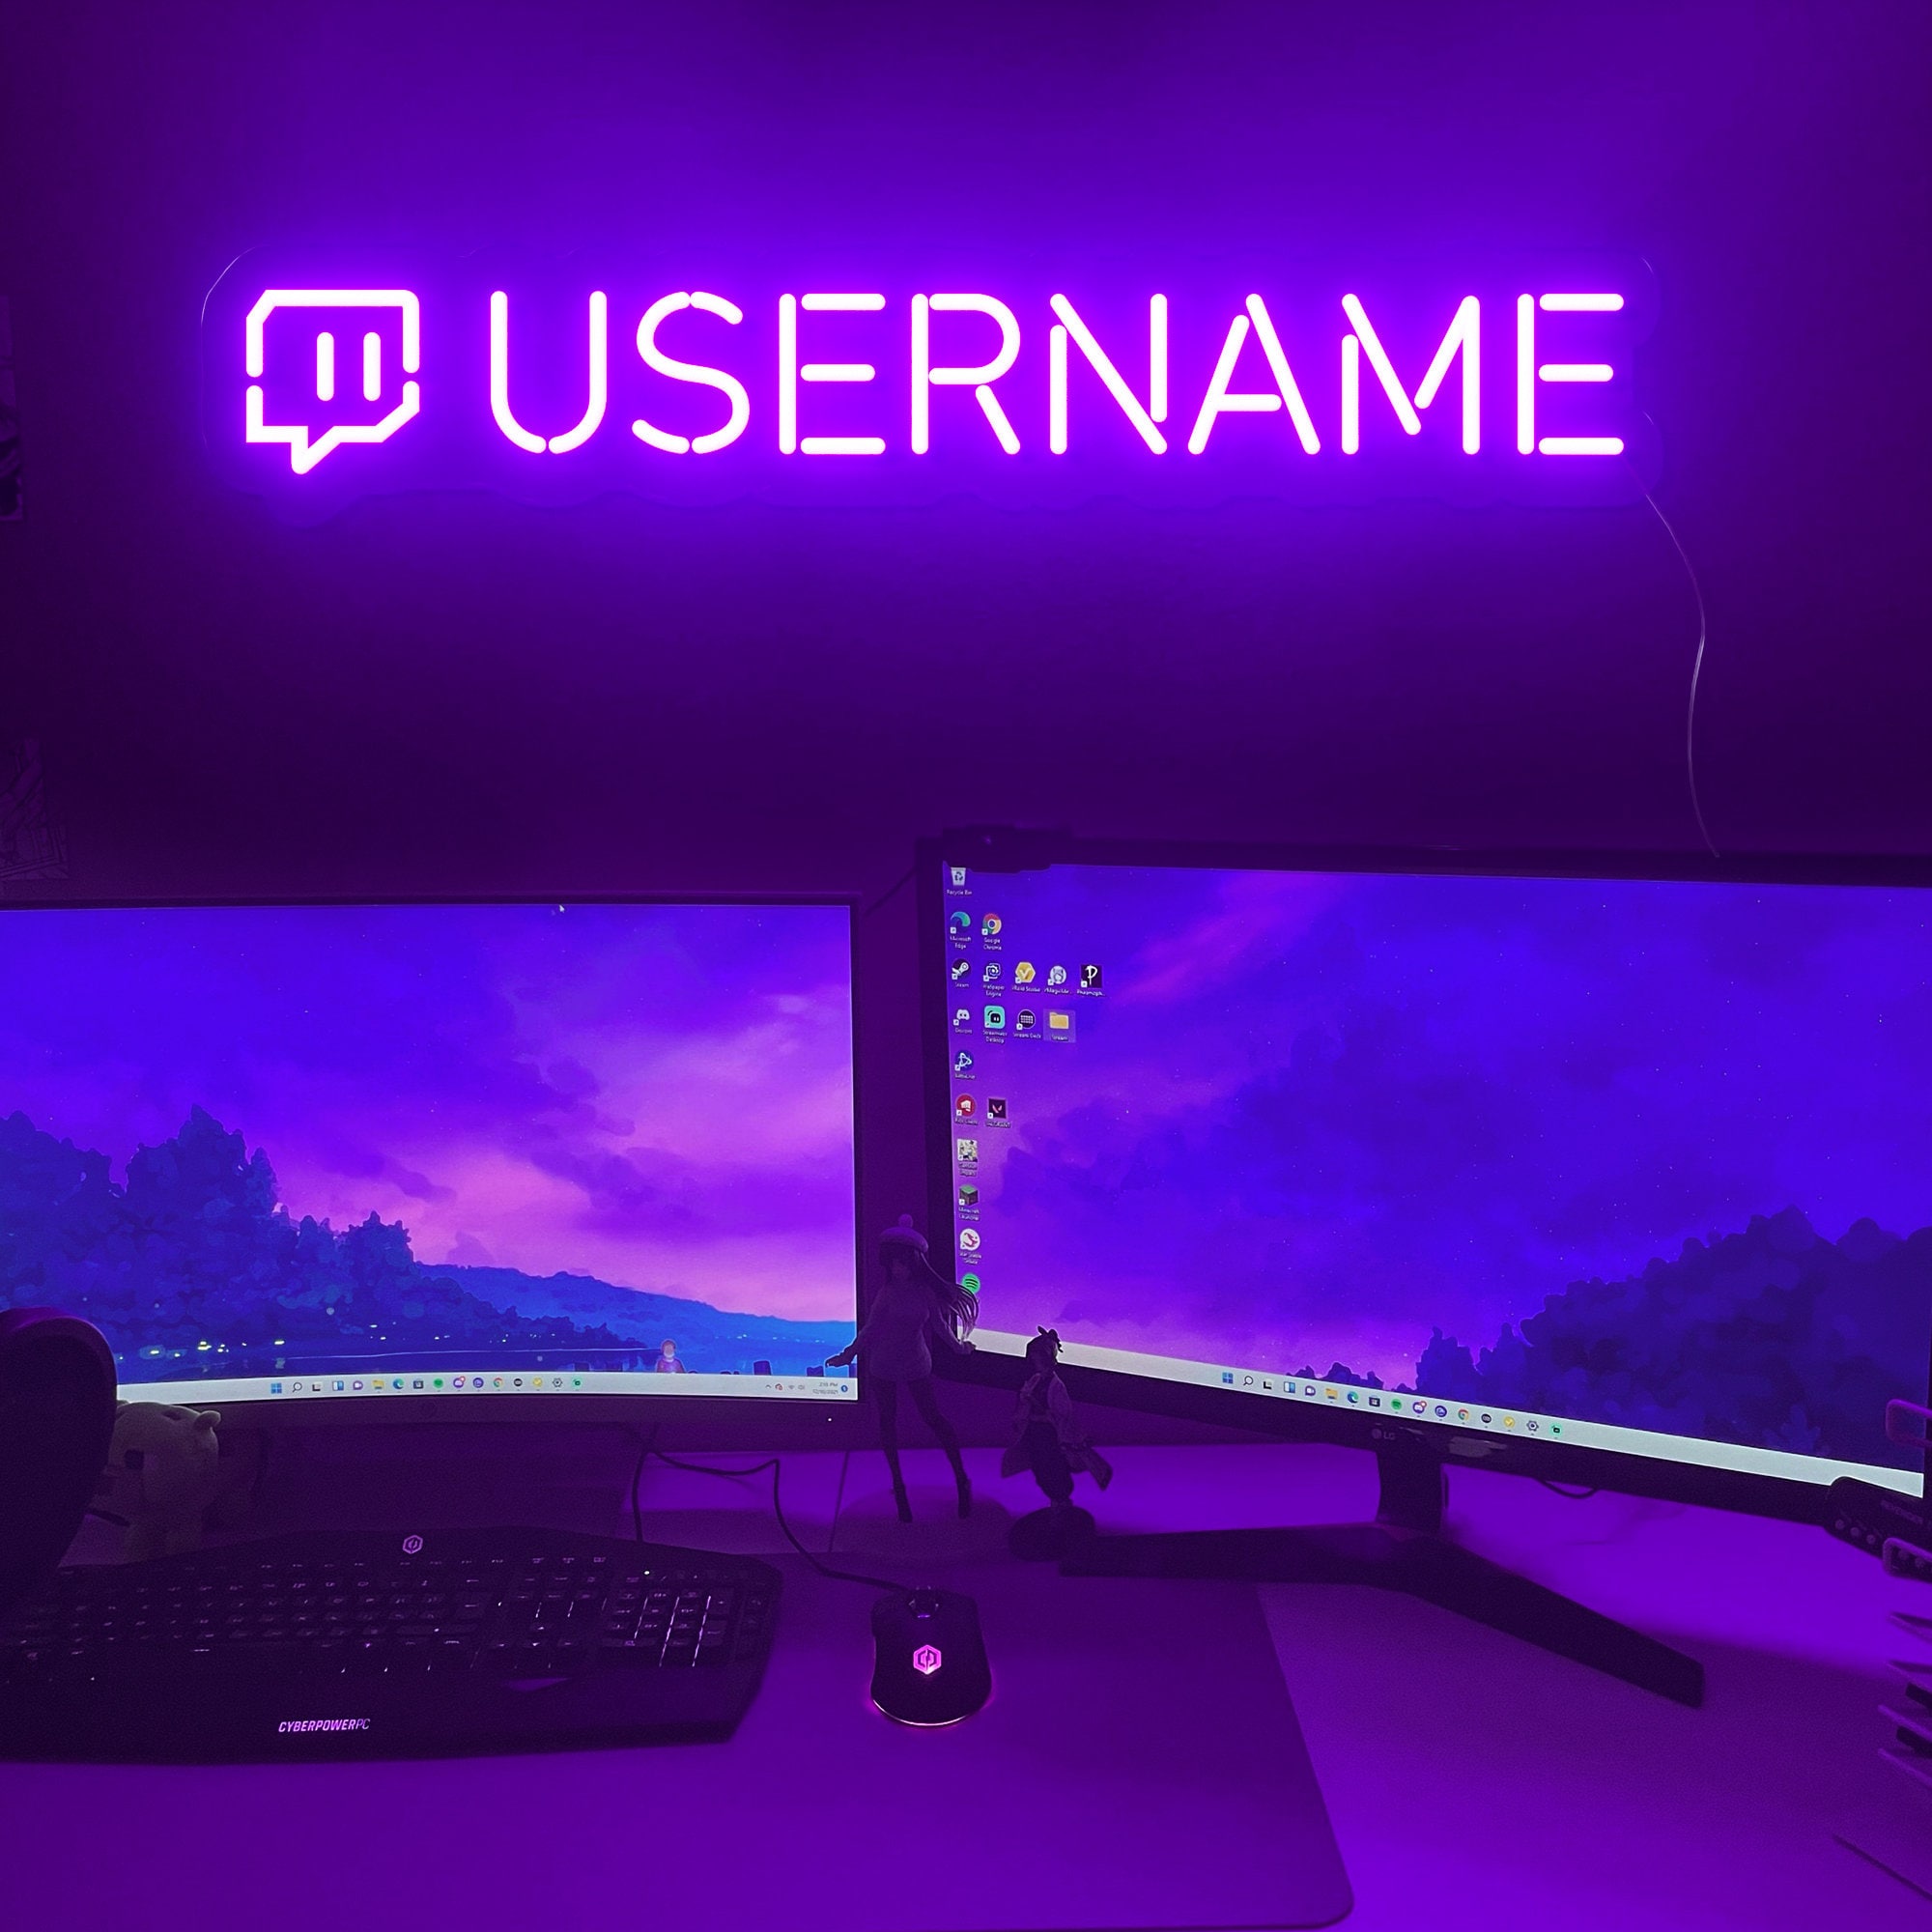 Led Personalized Gamertag Twitch Streamer night light sign with logo customization